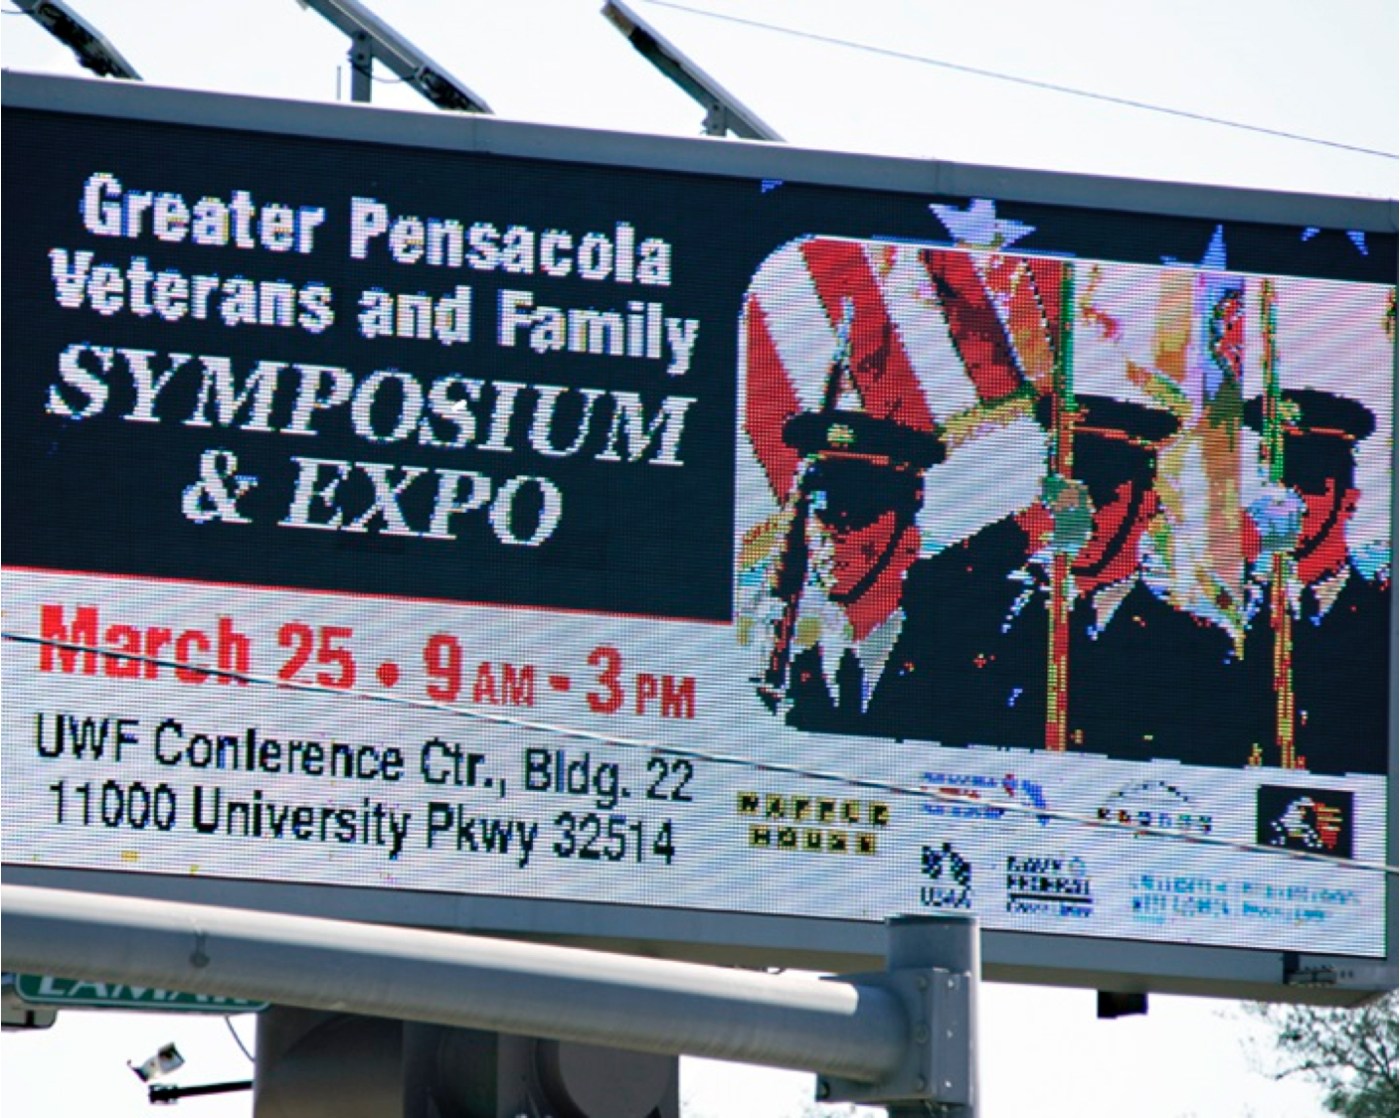 Greater Pensacola Veterans and Family Symposium